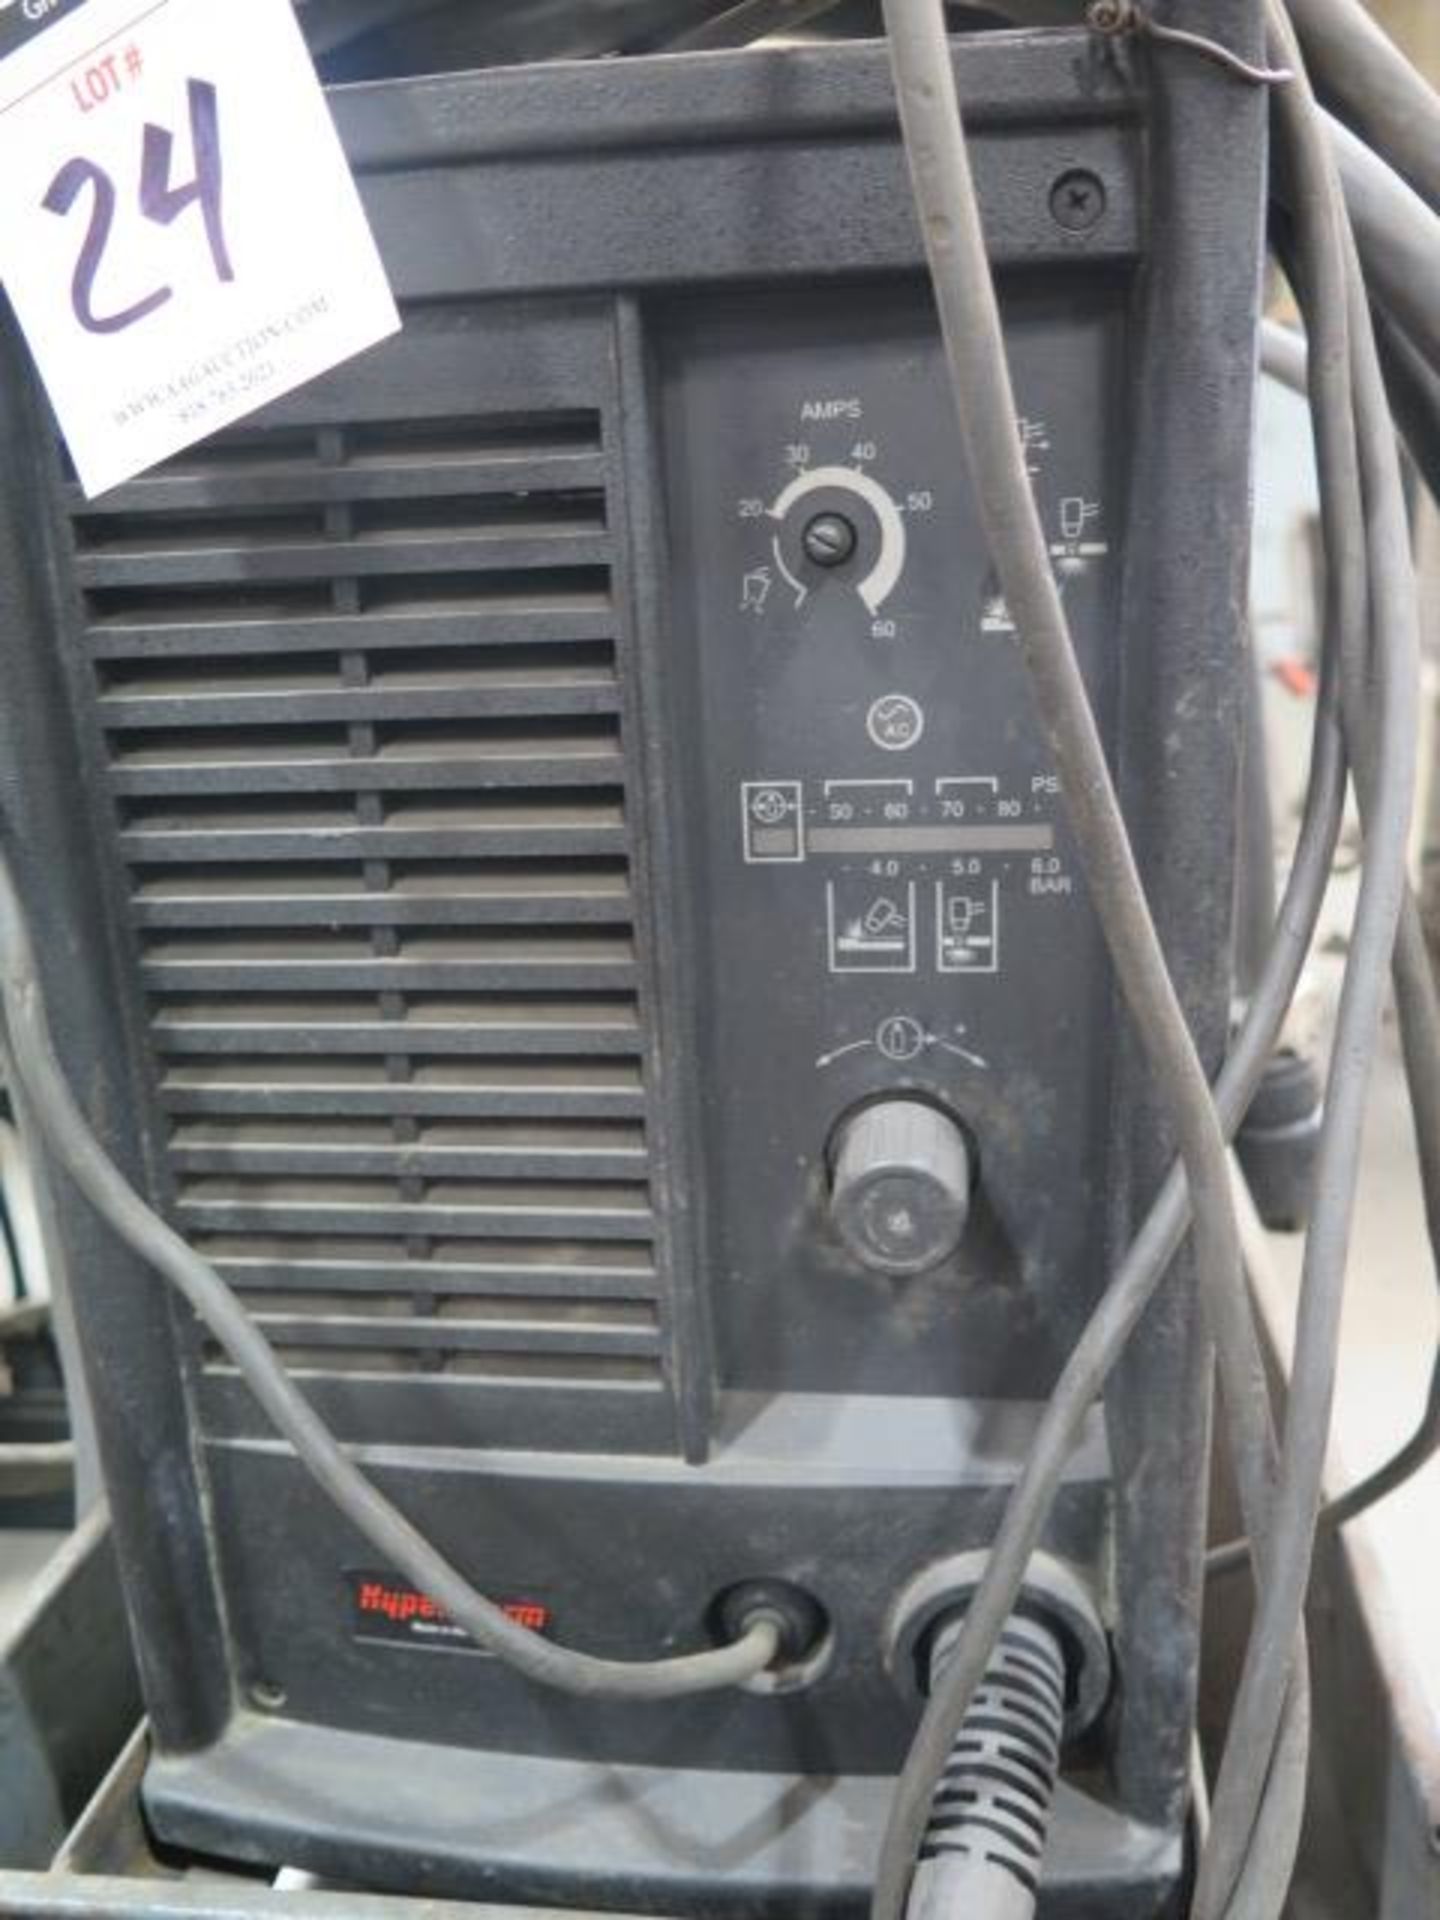 Hypertherm PowerMax 1000 Plasma Cutting Power Source w/ Cart (SOLD AS-IS - NO WARRANTY) - Image 3 of 6